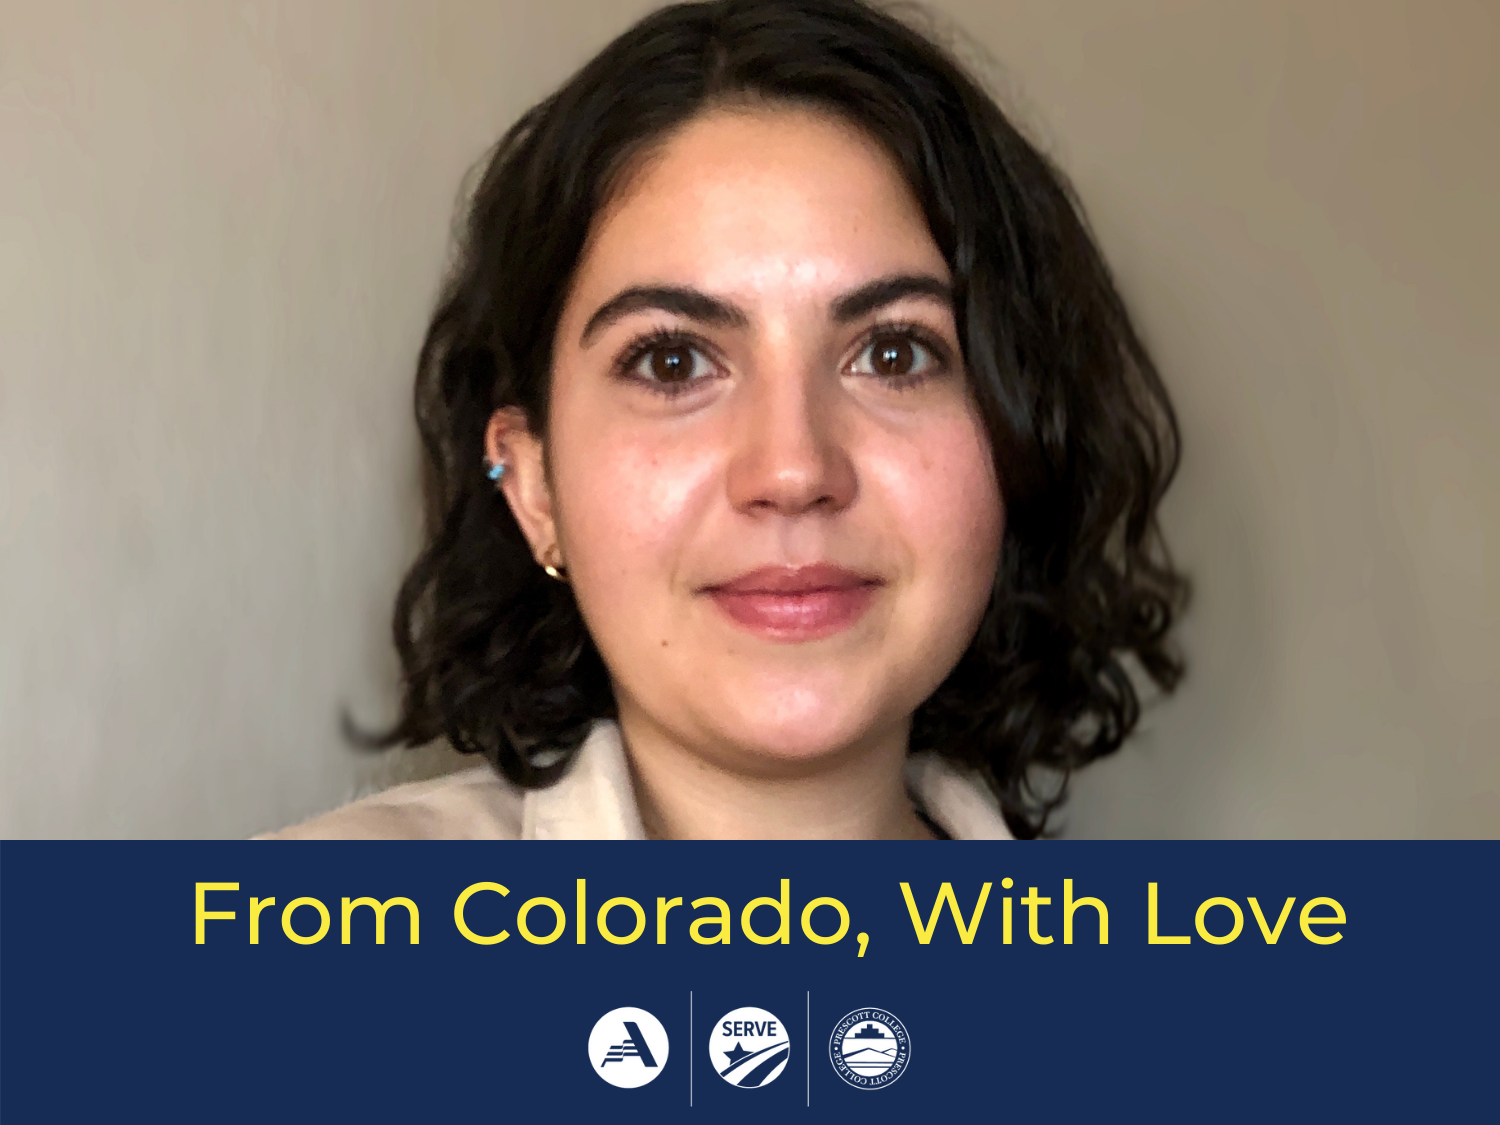 Caroline Wright - From Colorado with Love 1 - Financial Insights - Blog Cover